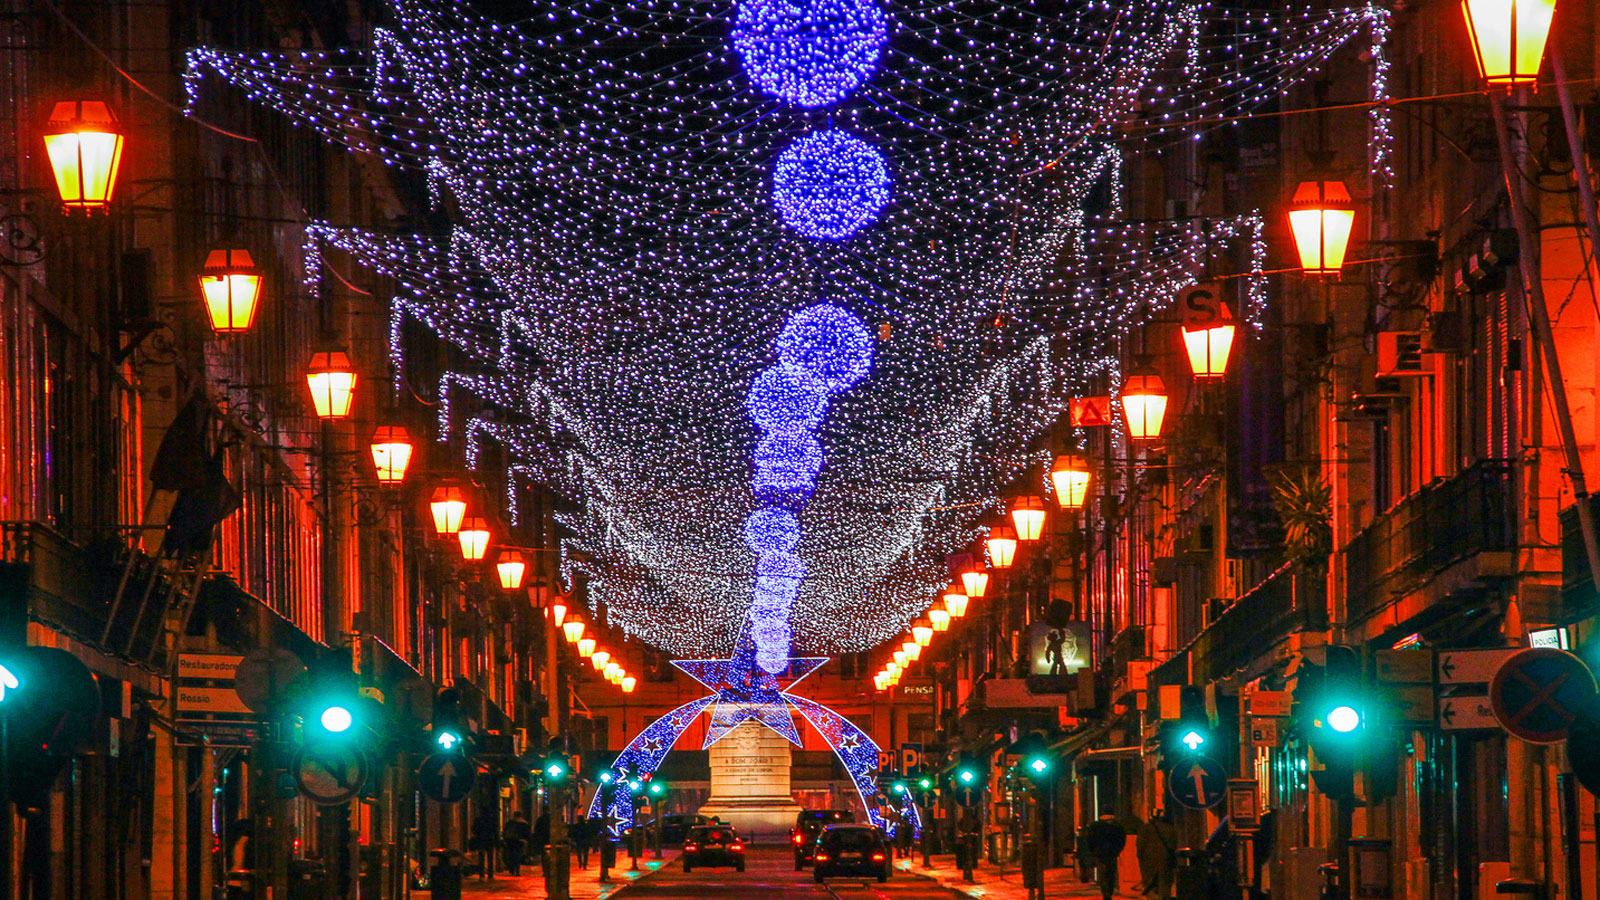 The best Portuguese tourist destinations for this Christmas